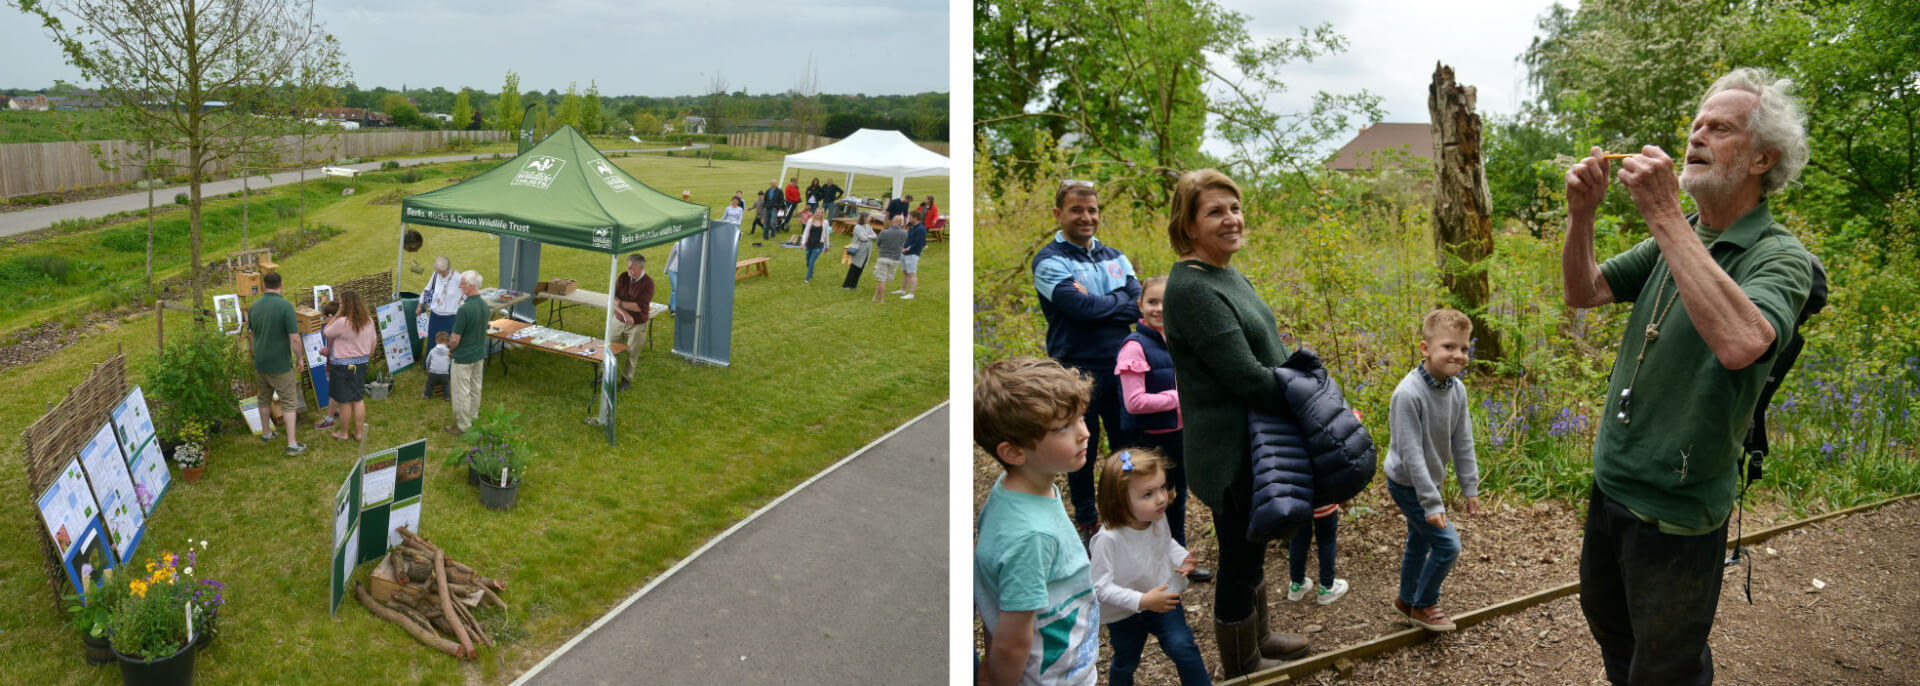 Two photographs, the first showing a Wildlife trust marquee with people within on green space within the development and the second showing a guide from the Woodland Trust talking to a group.